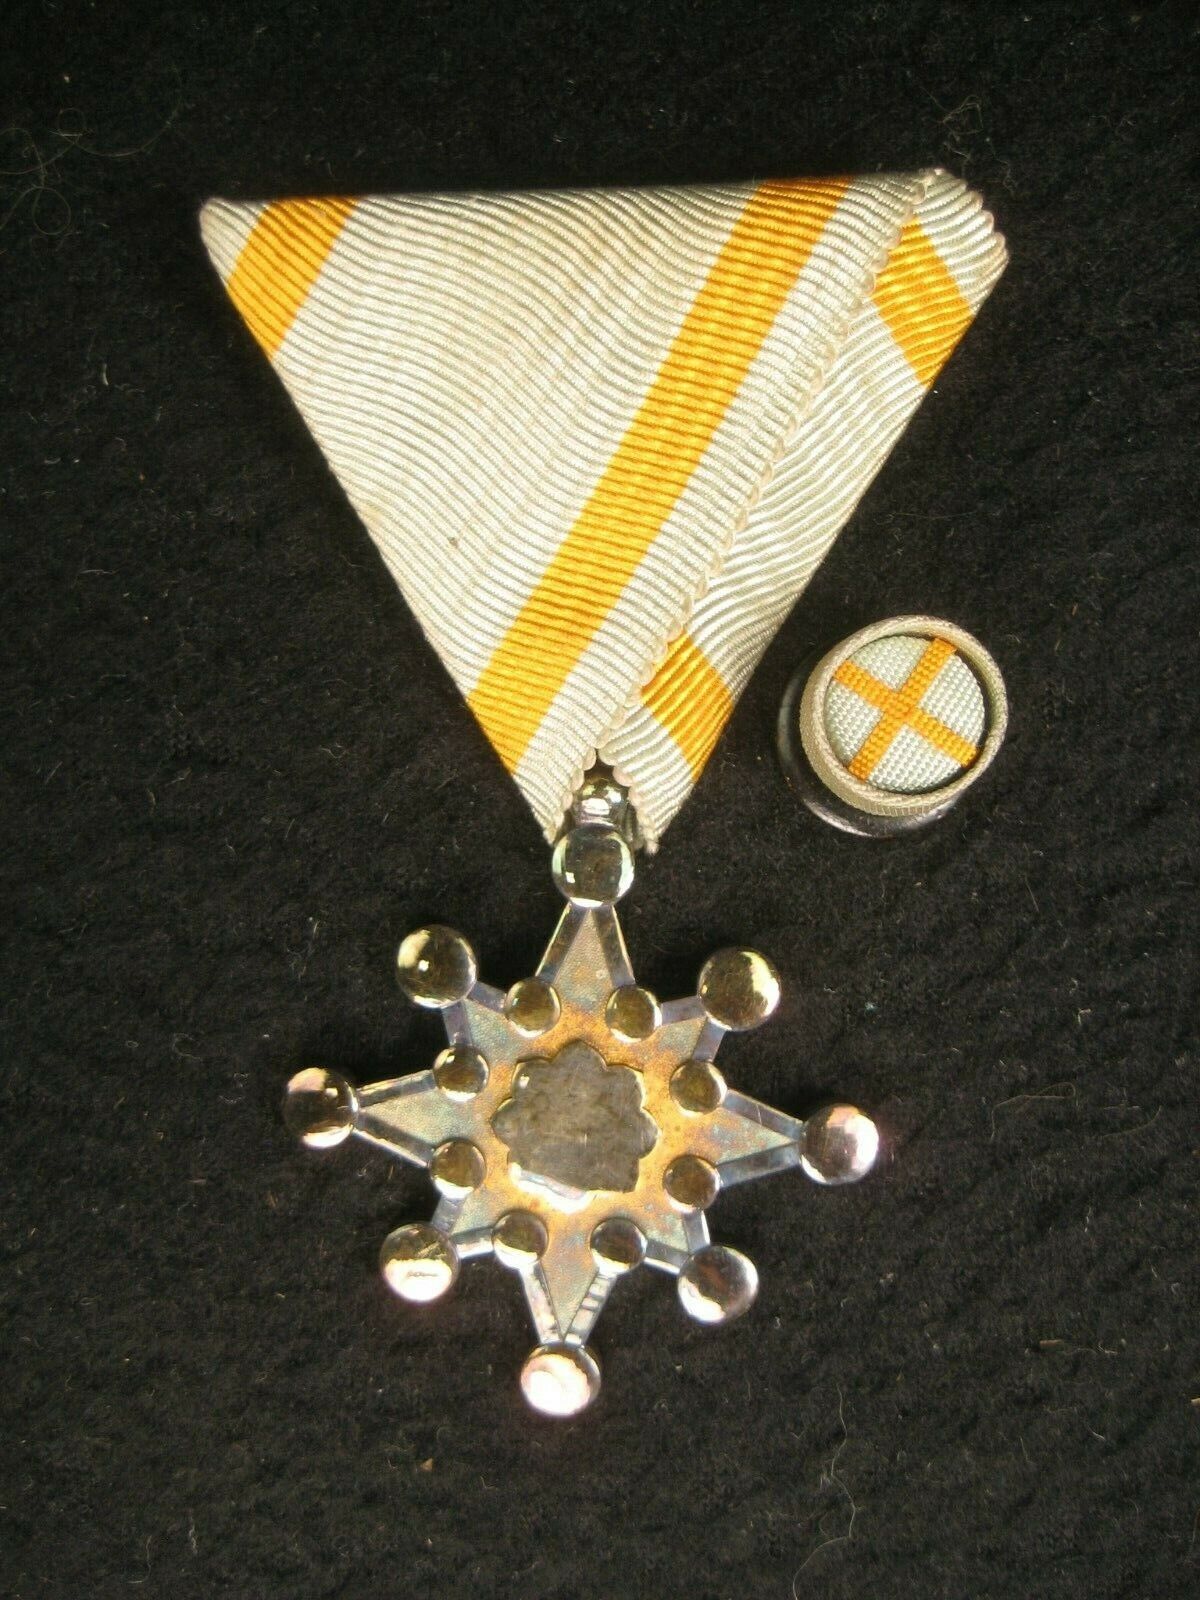 Antique Japanese Ww2 Silver Medal Order Of The Sacred Treasure W Case & Rosette